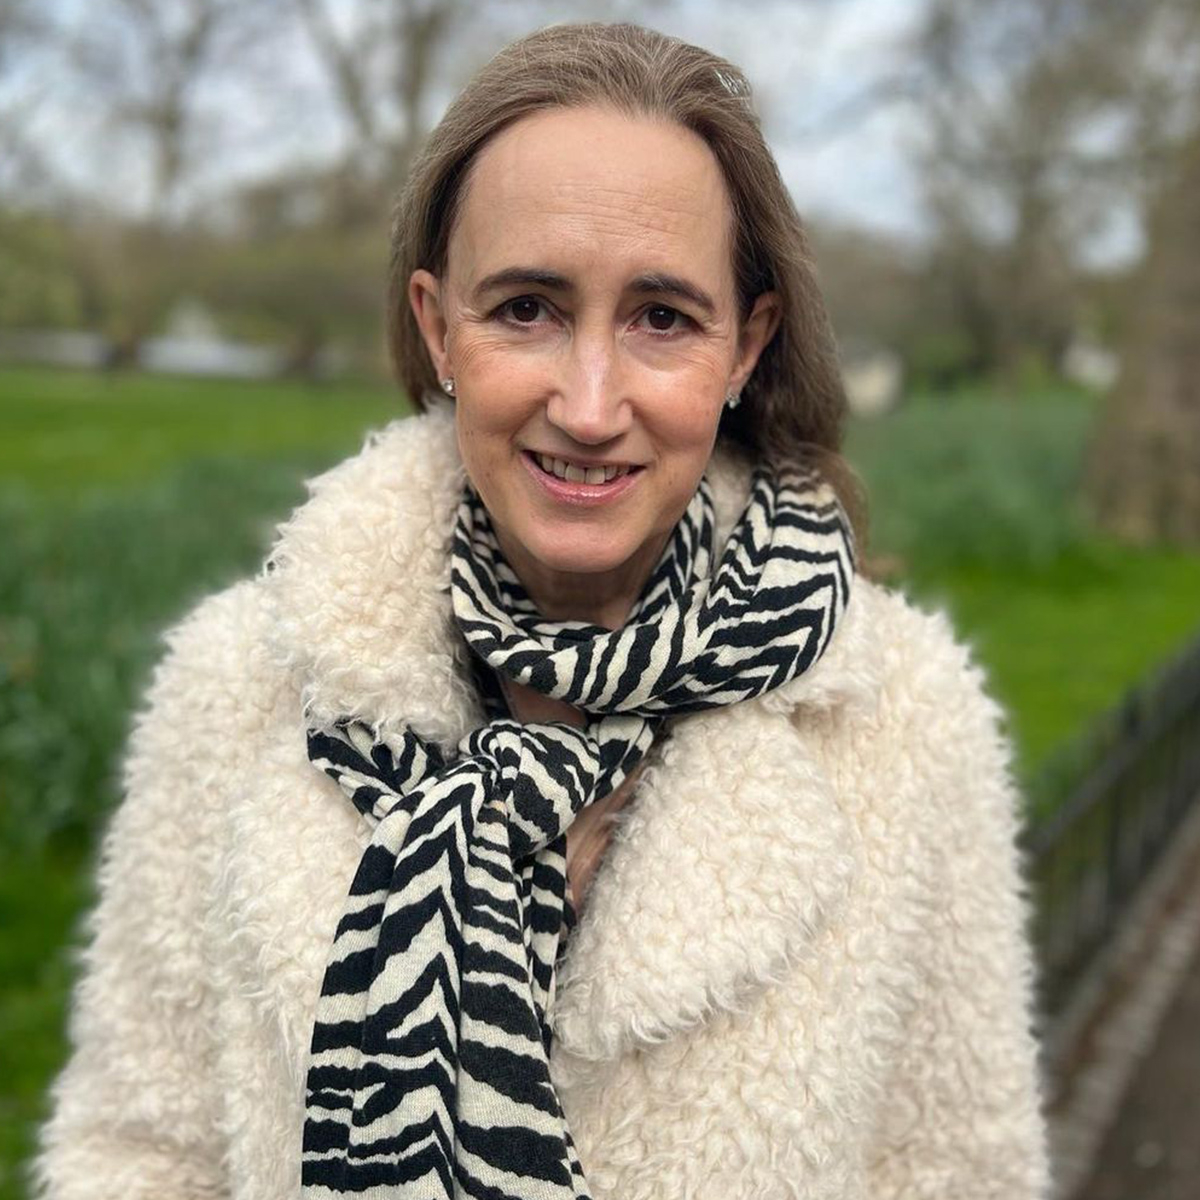 Shopaholic Author Sophie Kinsella Diagnosed With Aggressive Form of Brain Cancer